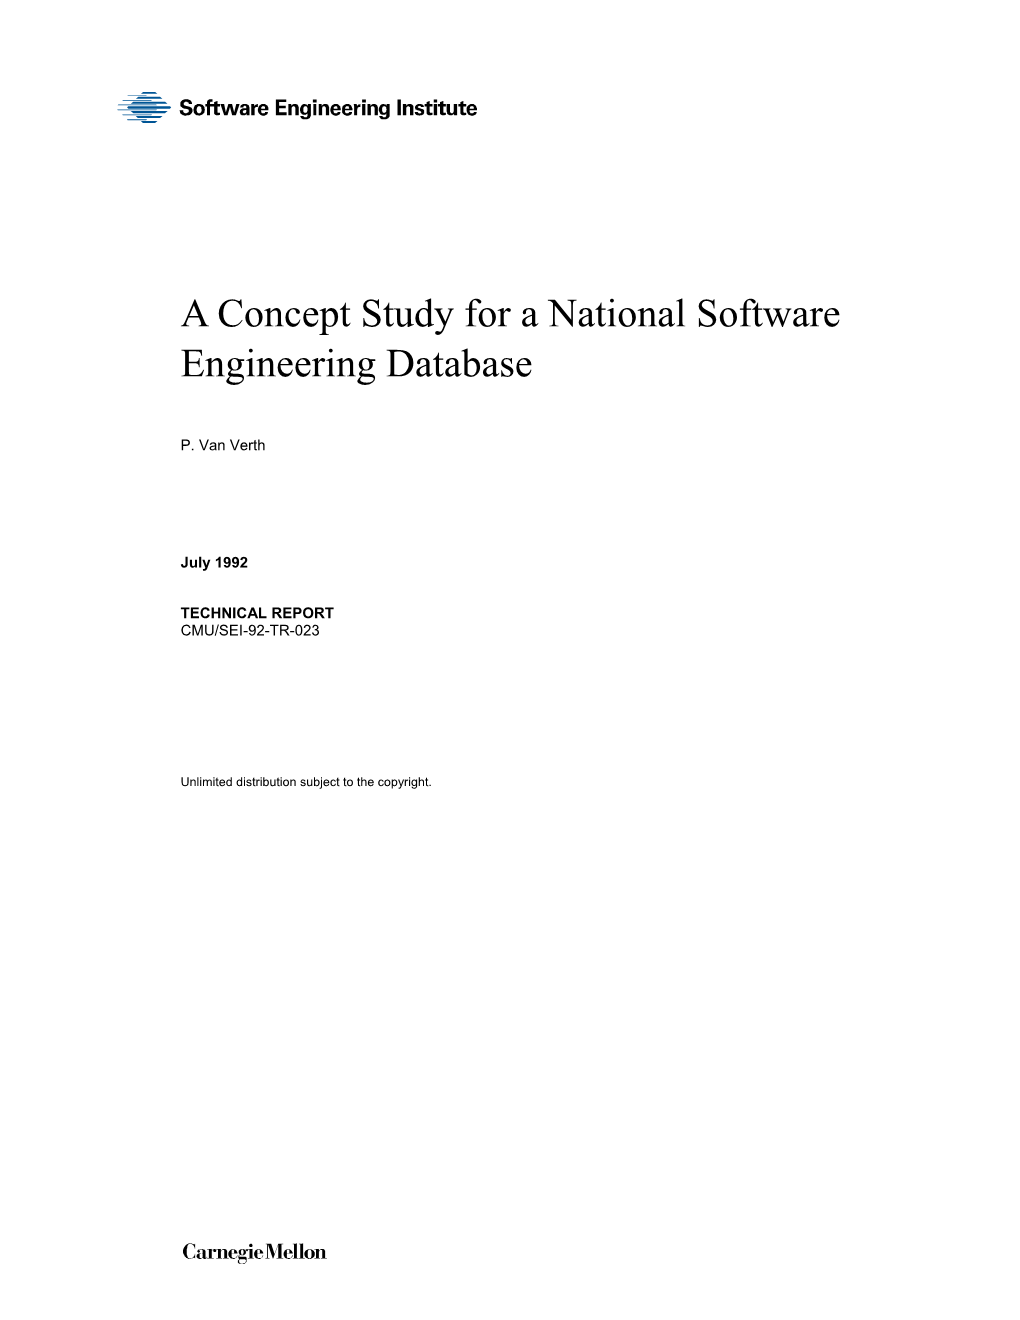 A Concept Study for a National Software Engineering Database